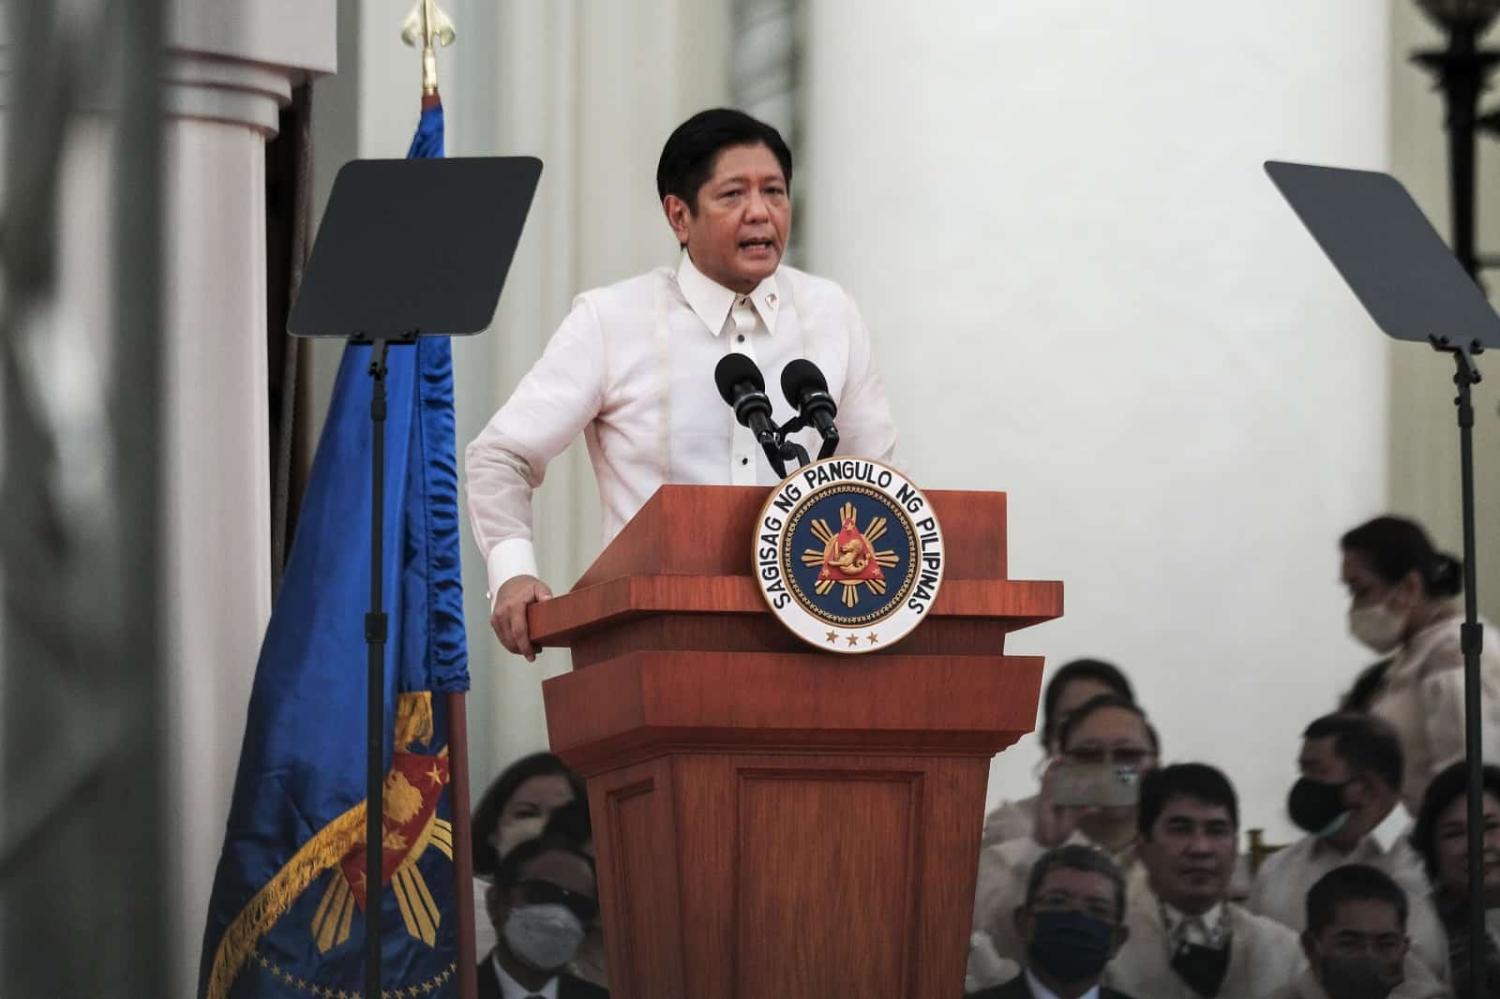 Ferdinand Marcos Jr during his swearing in as president at the Old Legislative Building in Manila, the Philippines, 30 June (Veejay Villafranca/Bloomberg via Getty Images)